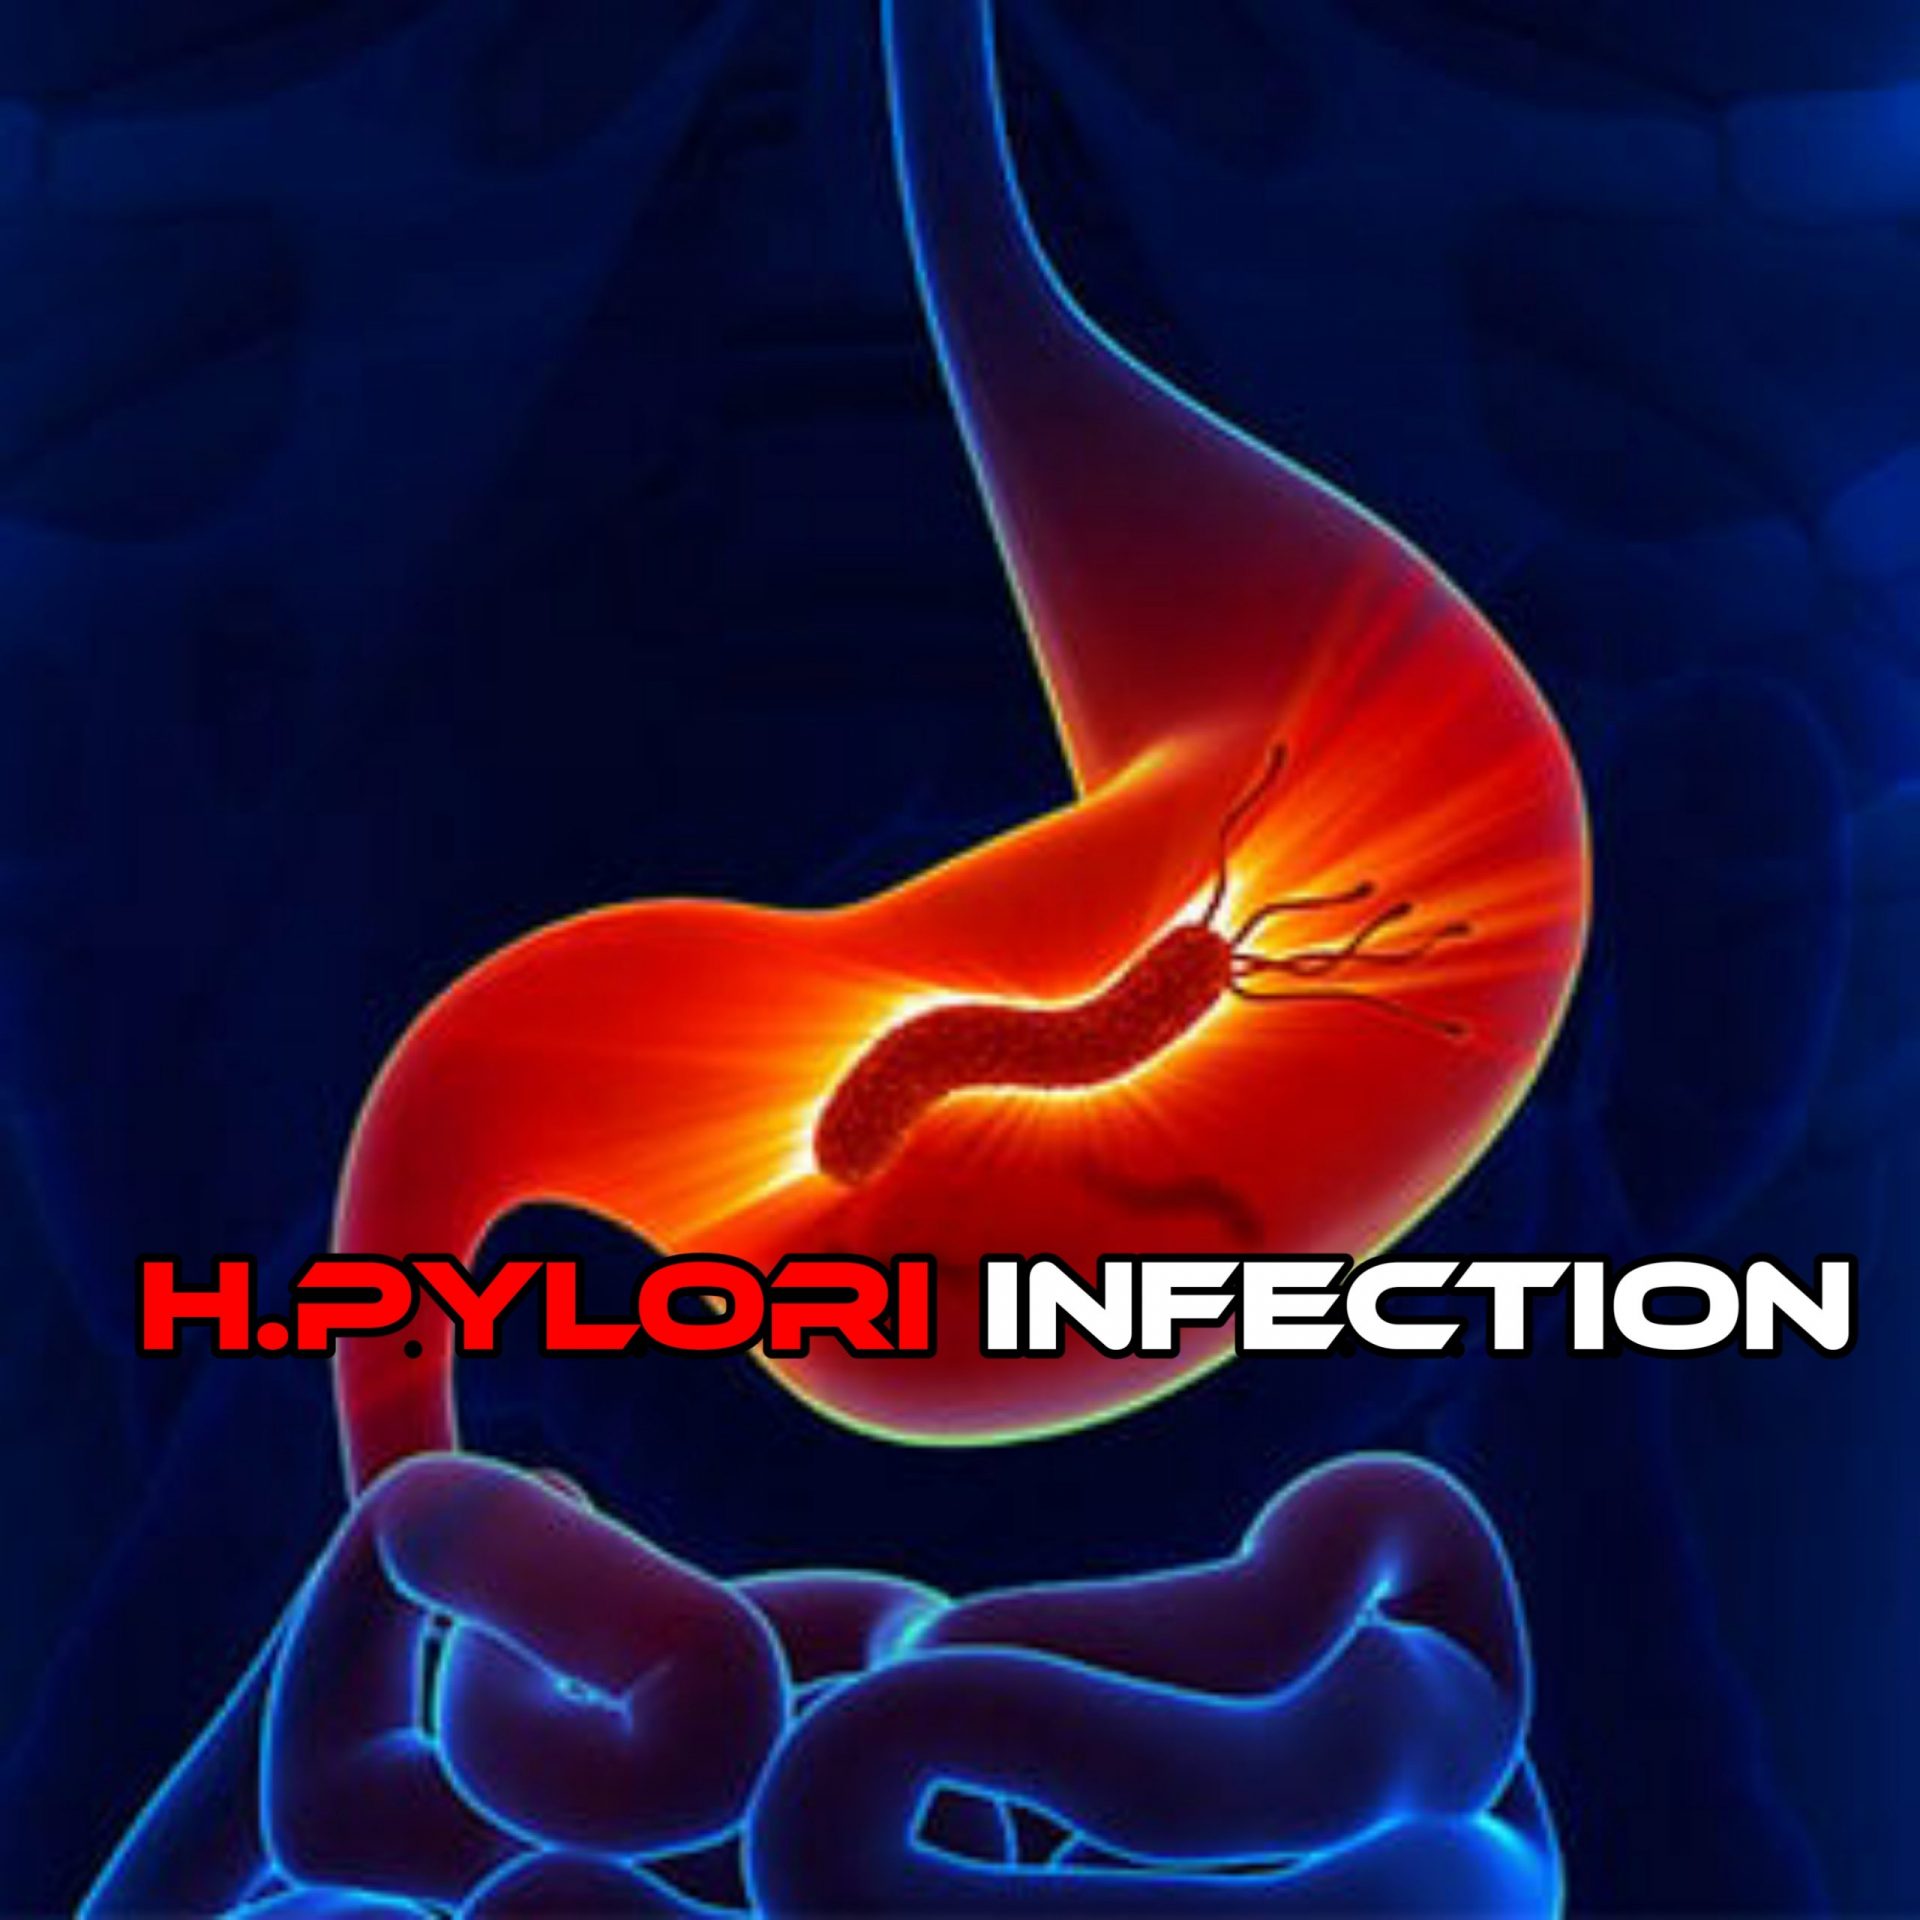 The Infection That effect The Stomach